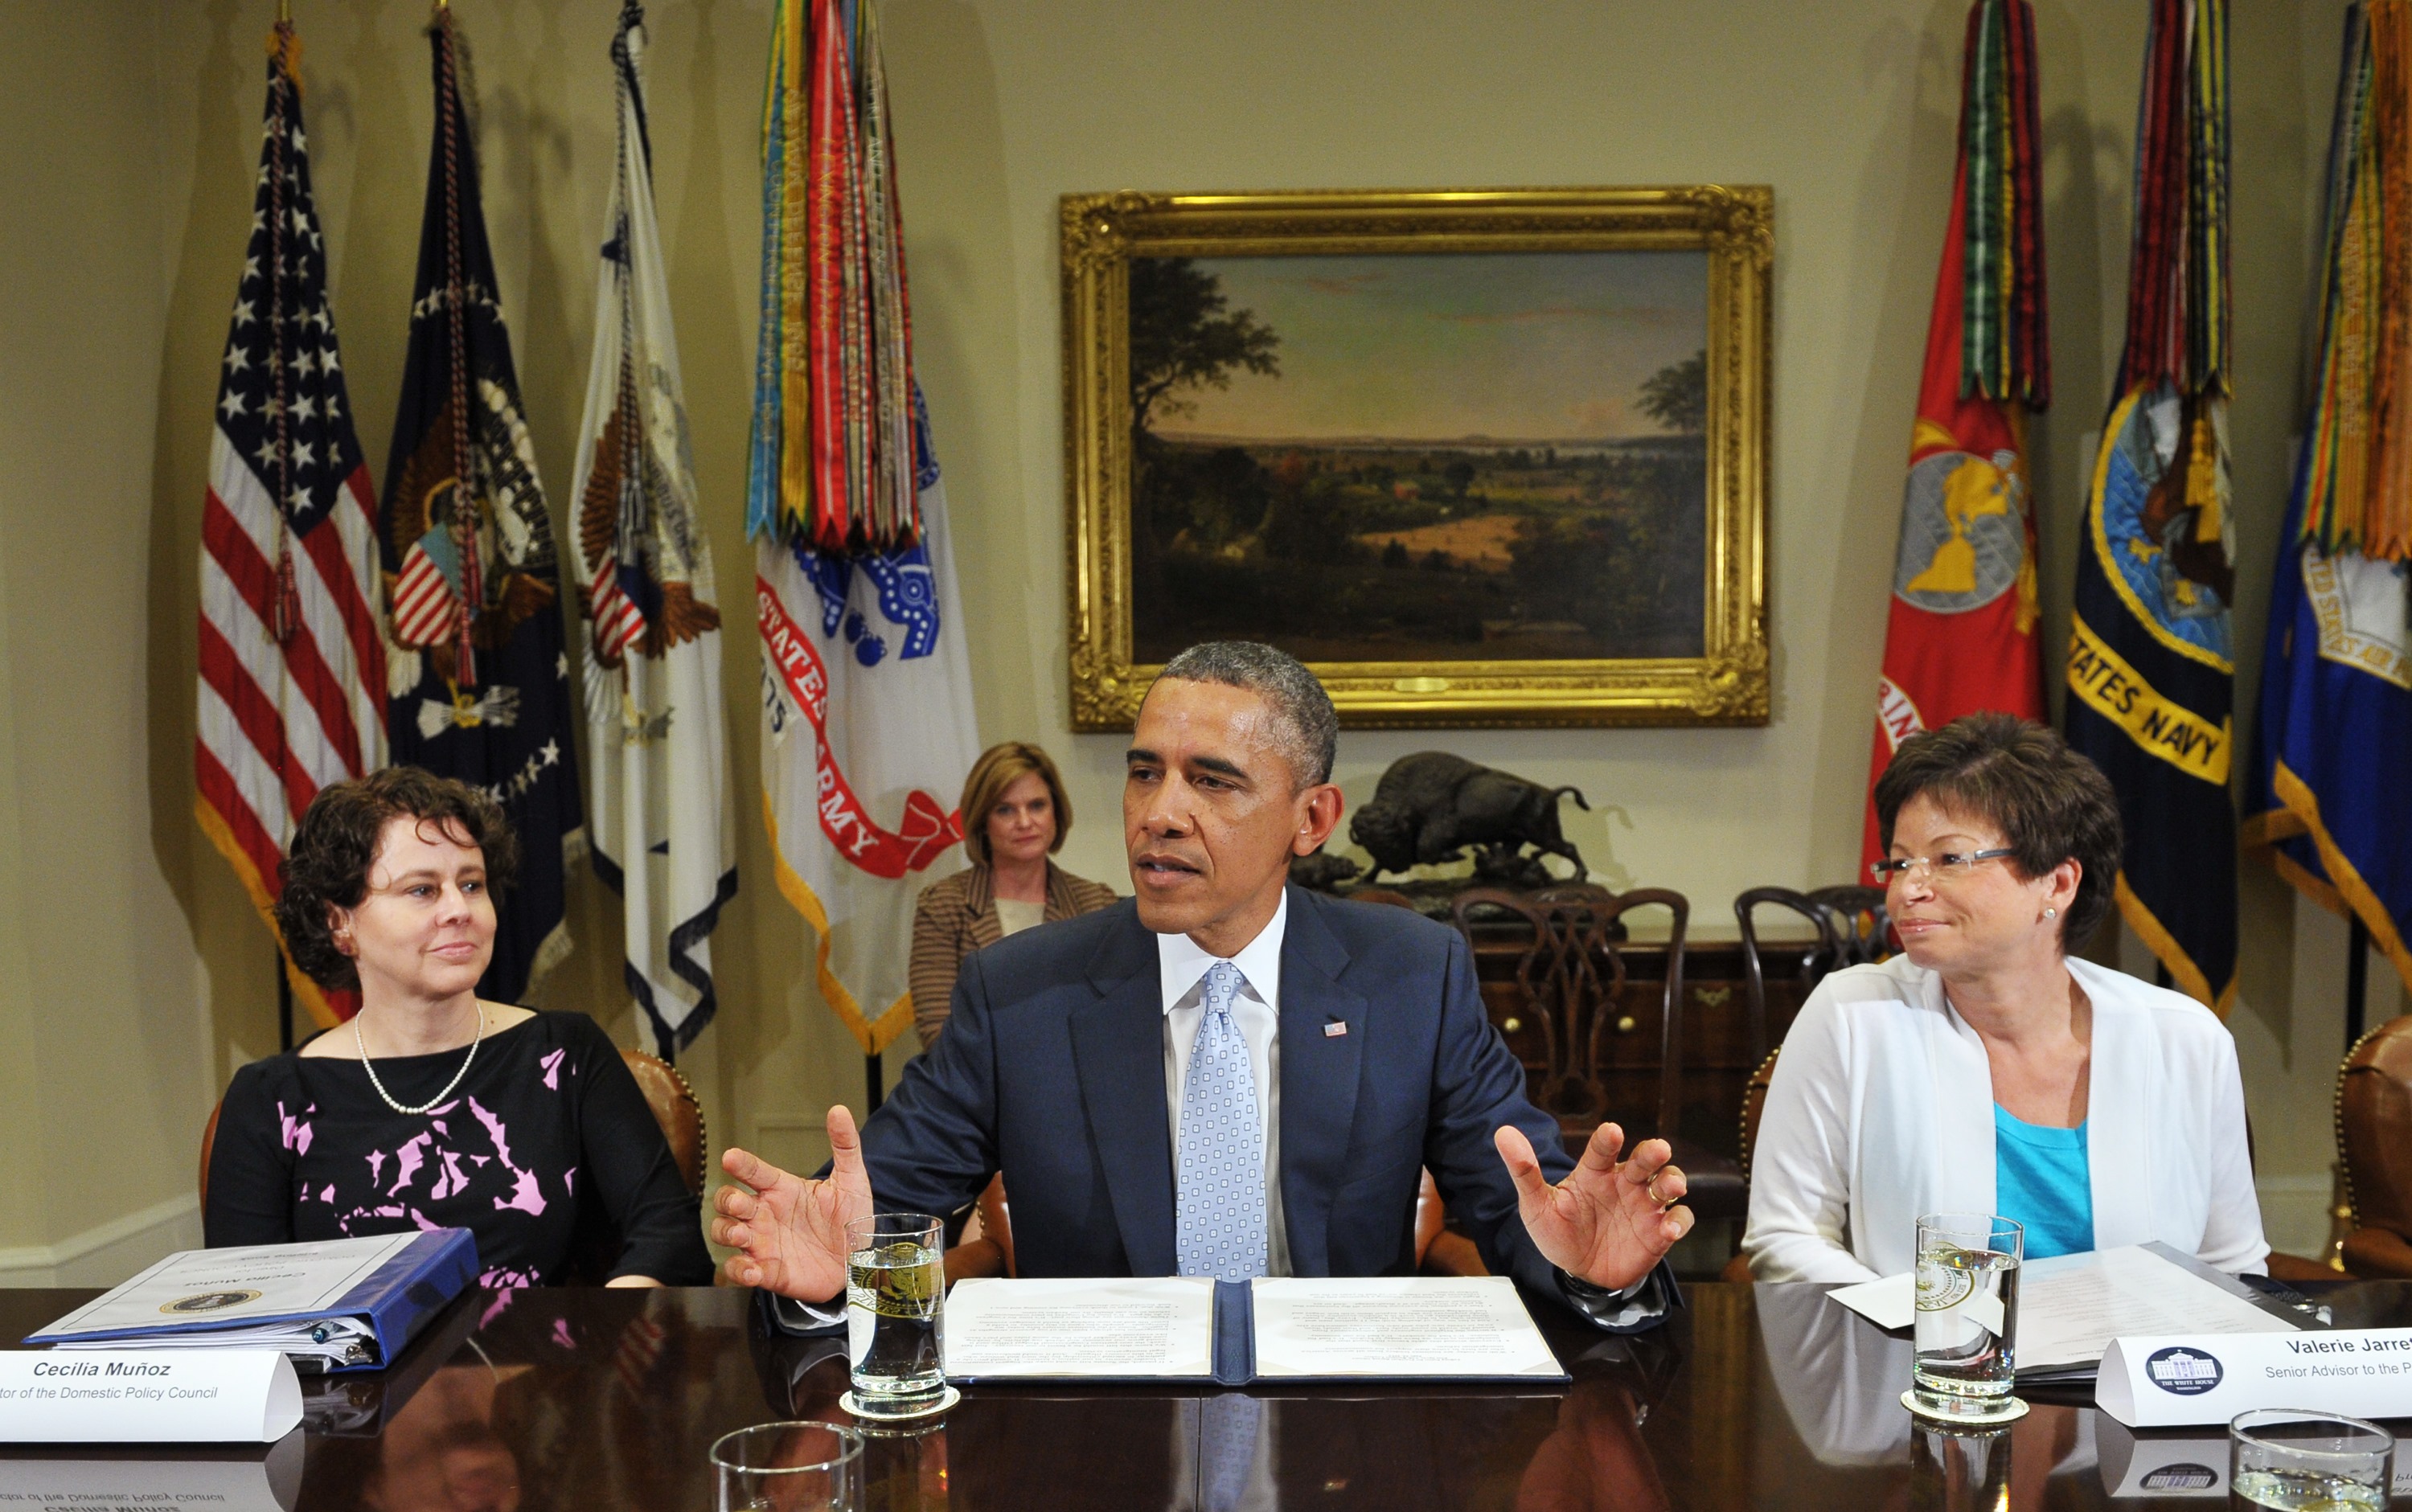 President Barack Obama meets with business leaders on immigration reform on June 24, 2013 in the Roosevelt Room of the White House in Washington, DC. (MANDEL NGAN&mdash;AFP/Getty Images)